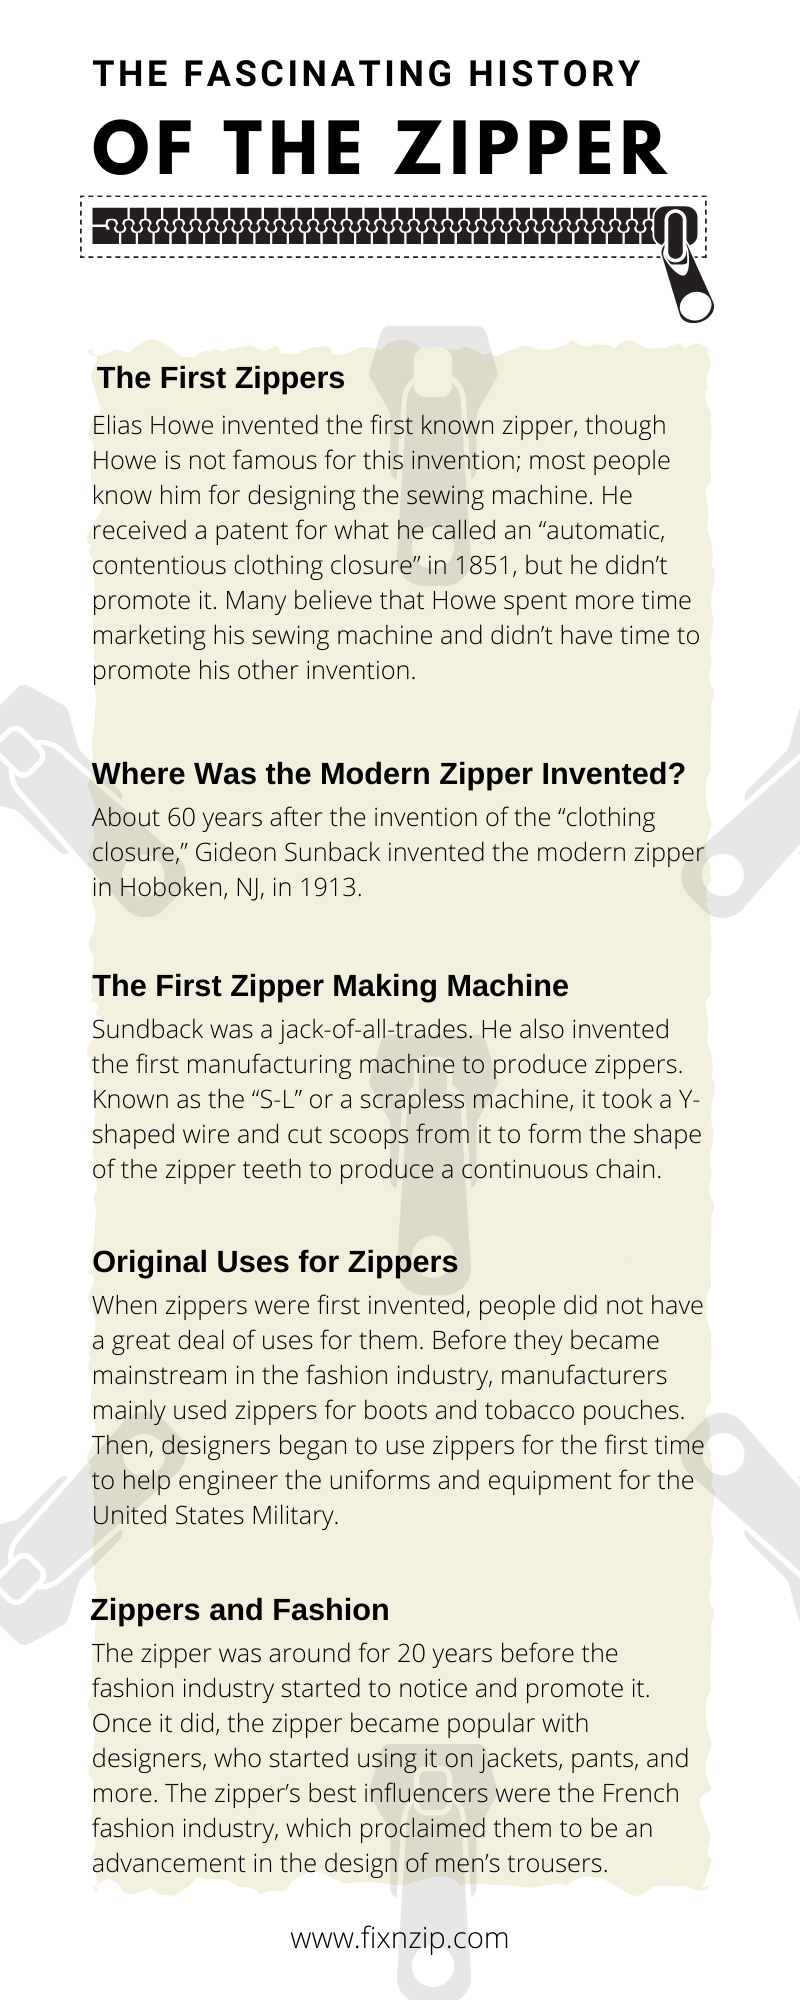 The Fascinating History of the Zipper